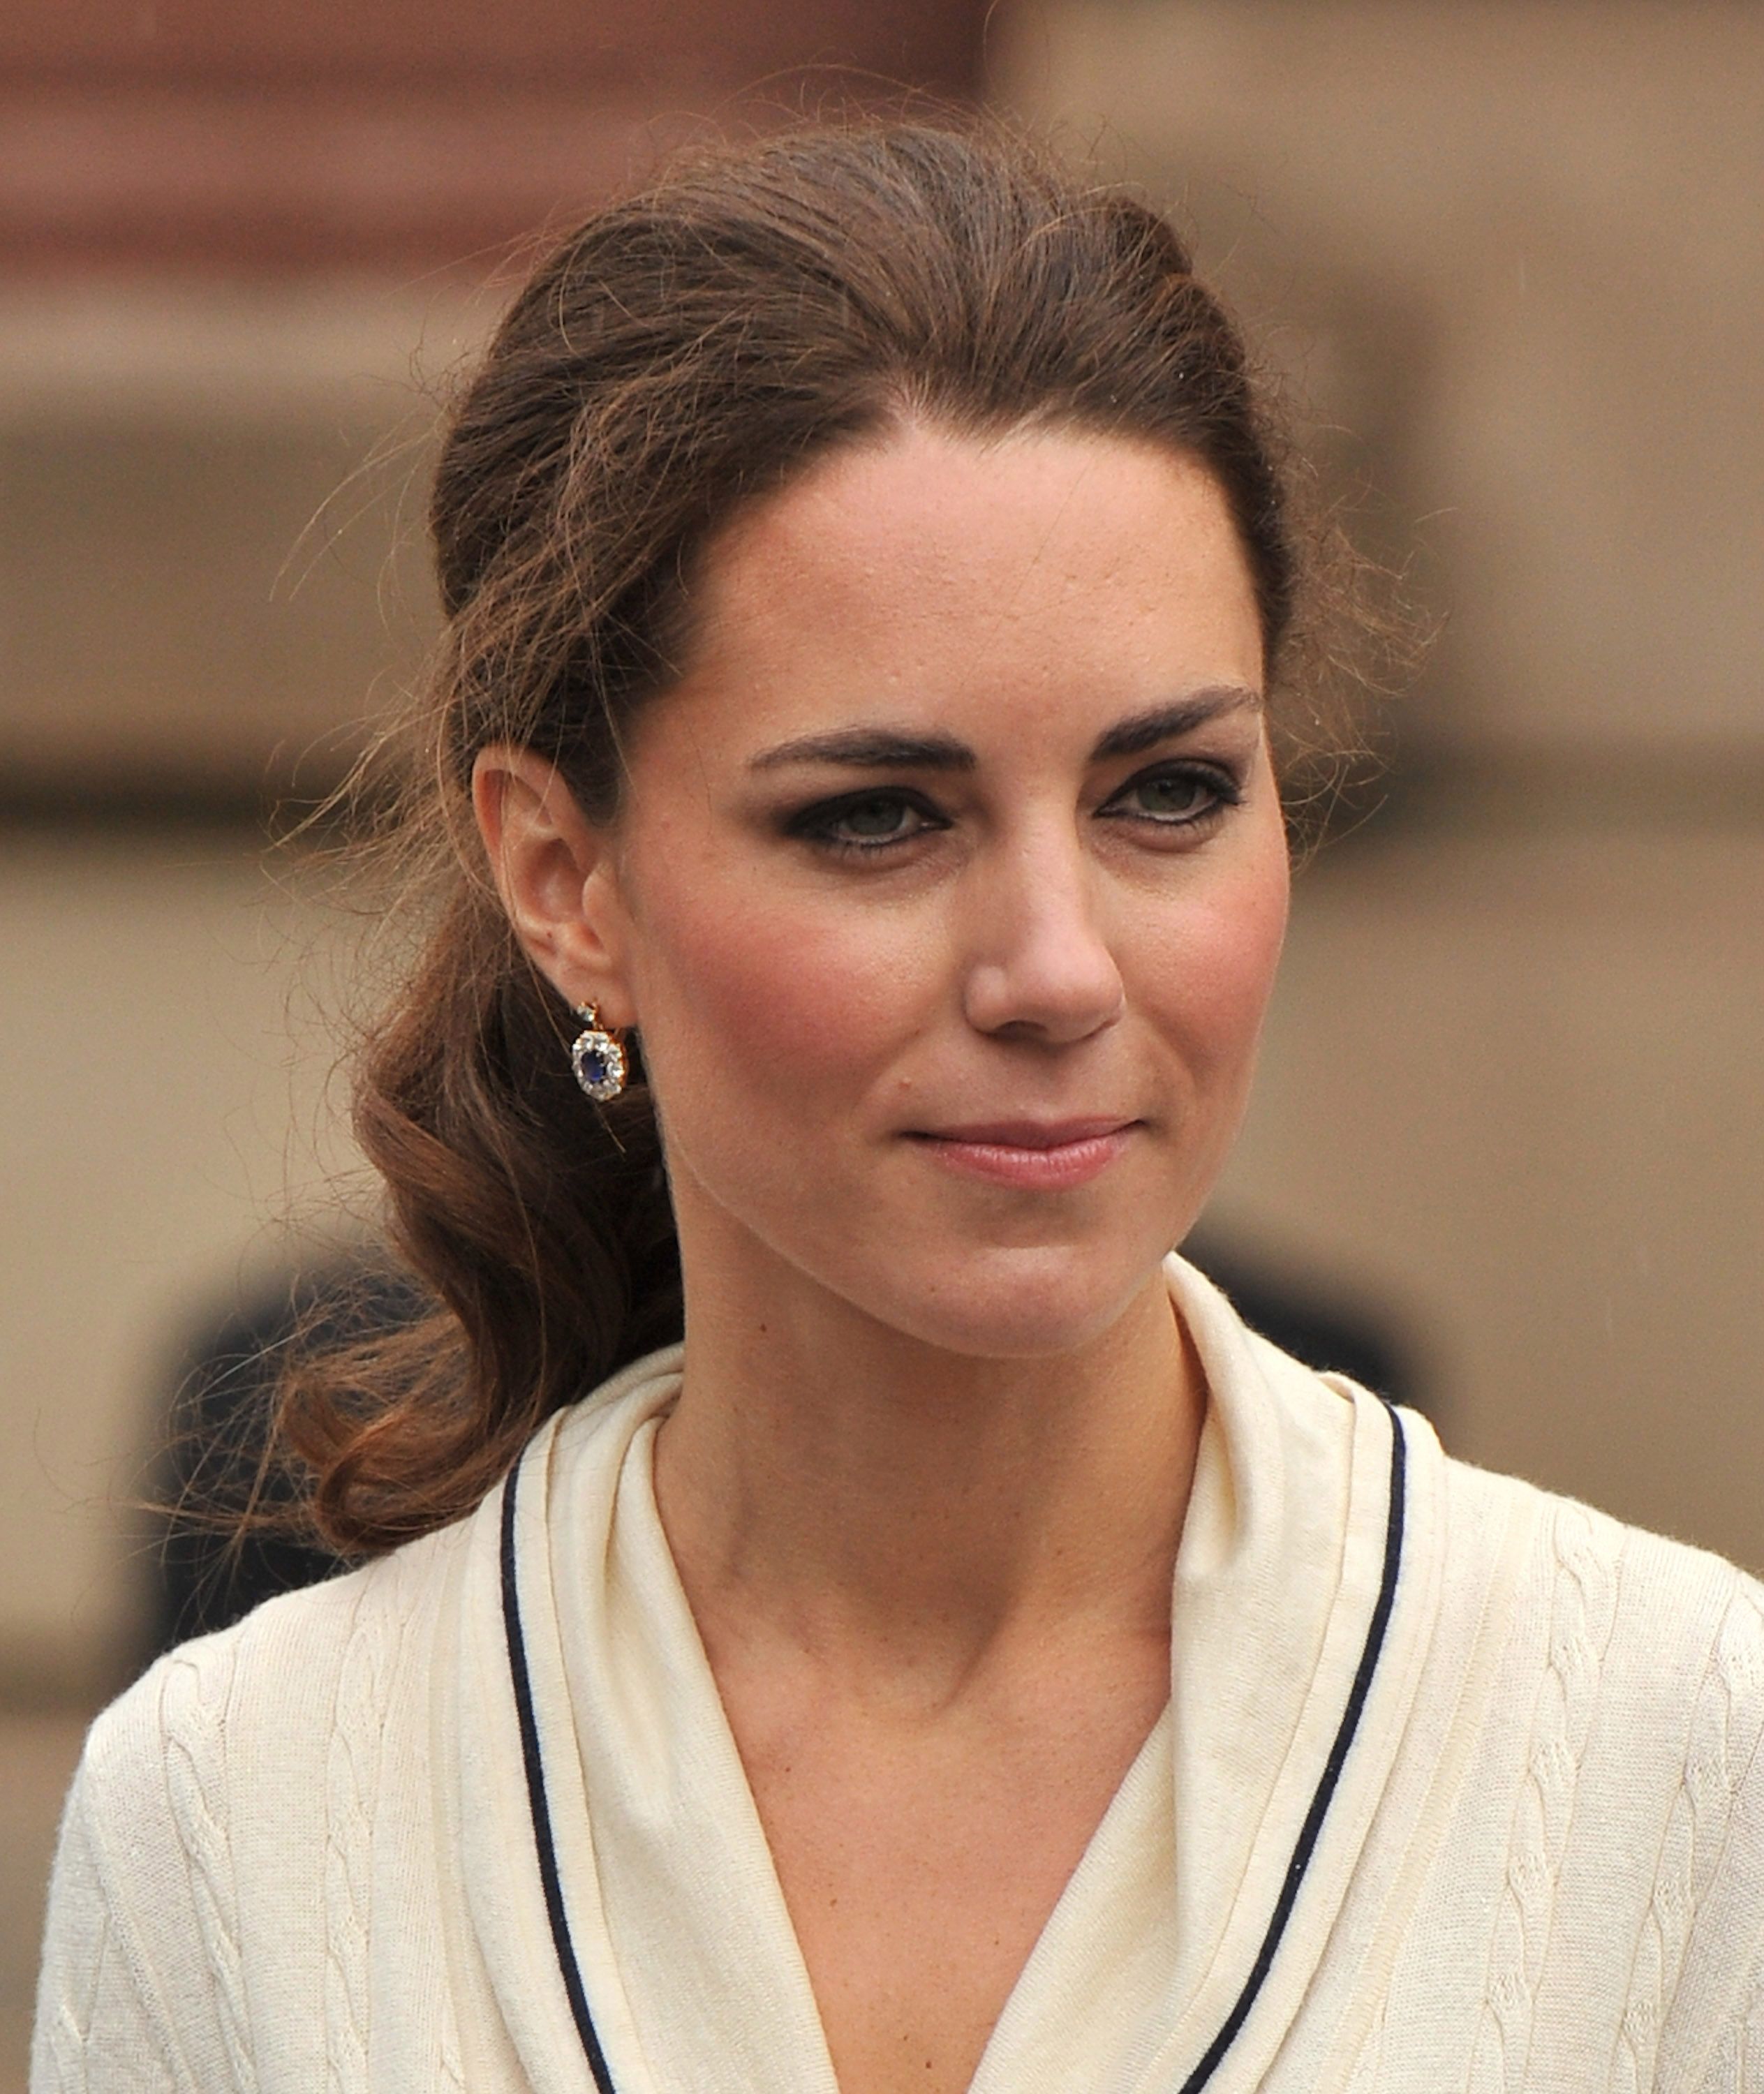 Kate Middletons Best Hair Looks Through the Years